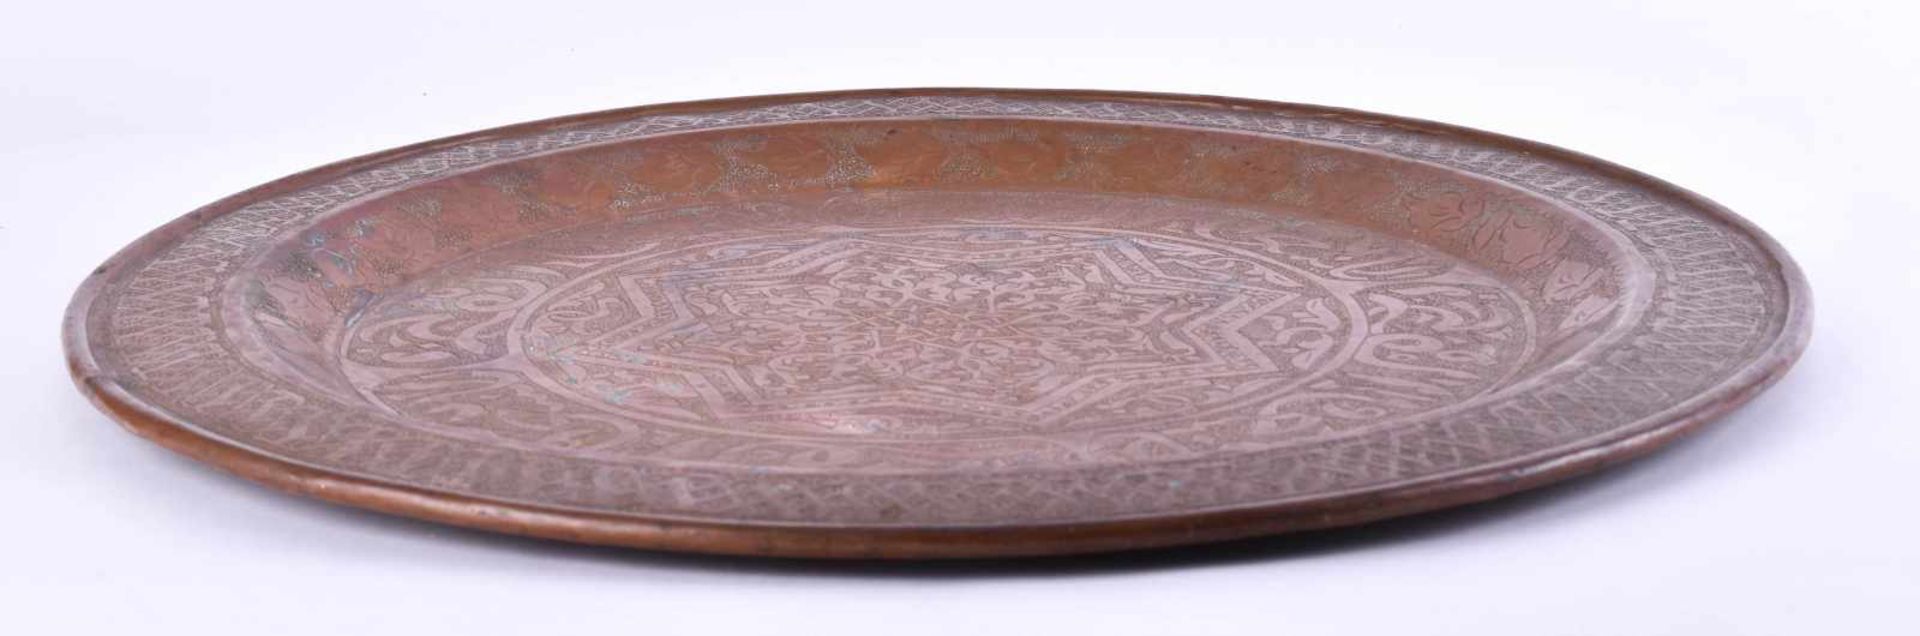 Plate Mameluk 19th centurycopper, finely chased with ornaments and calligraphy, Ø 47.5 cmTeller - Image 2 of 4